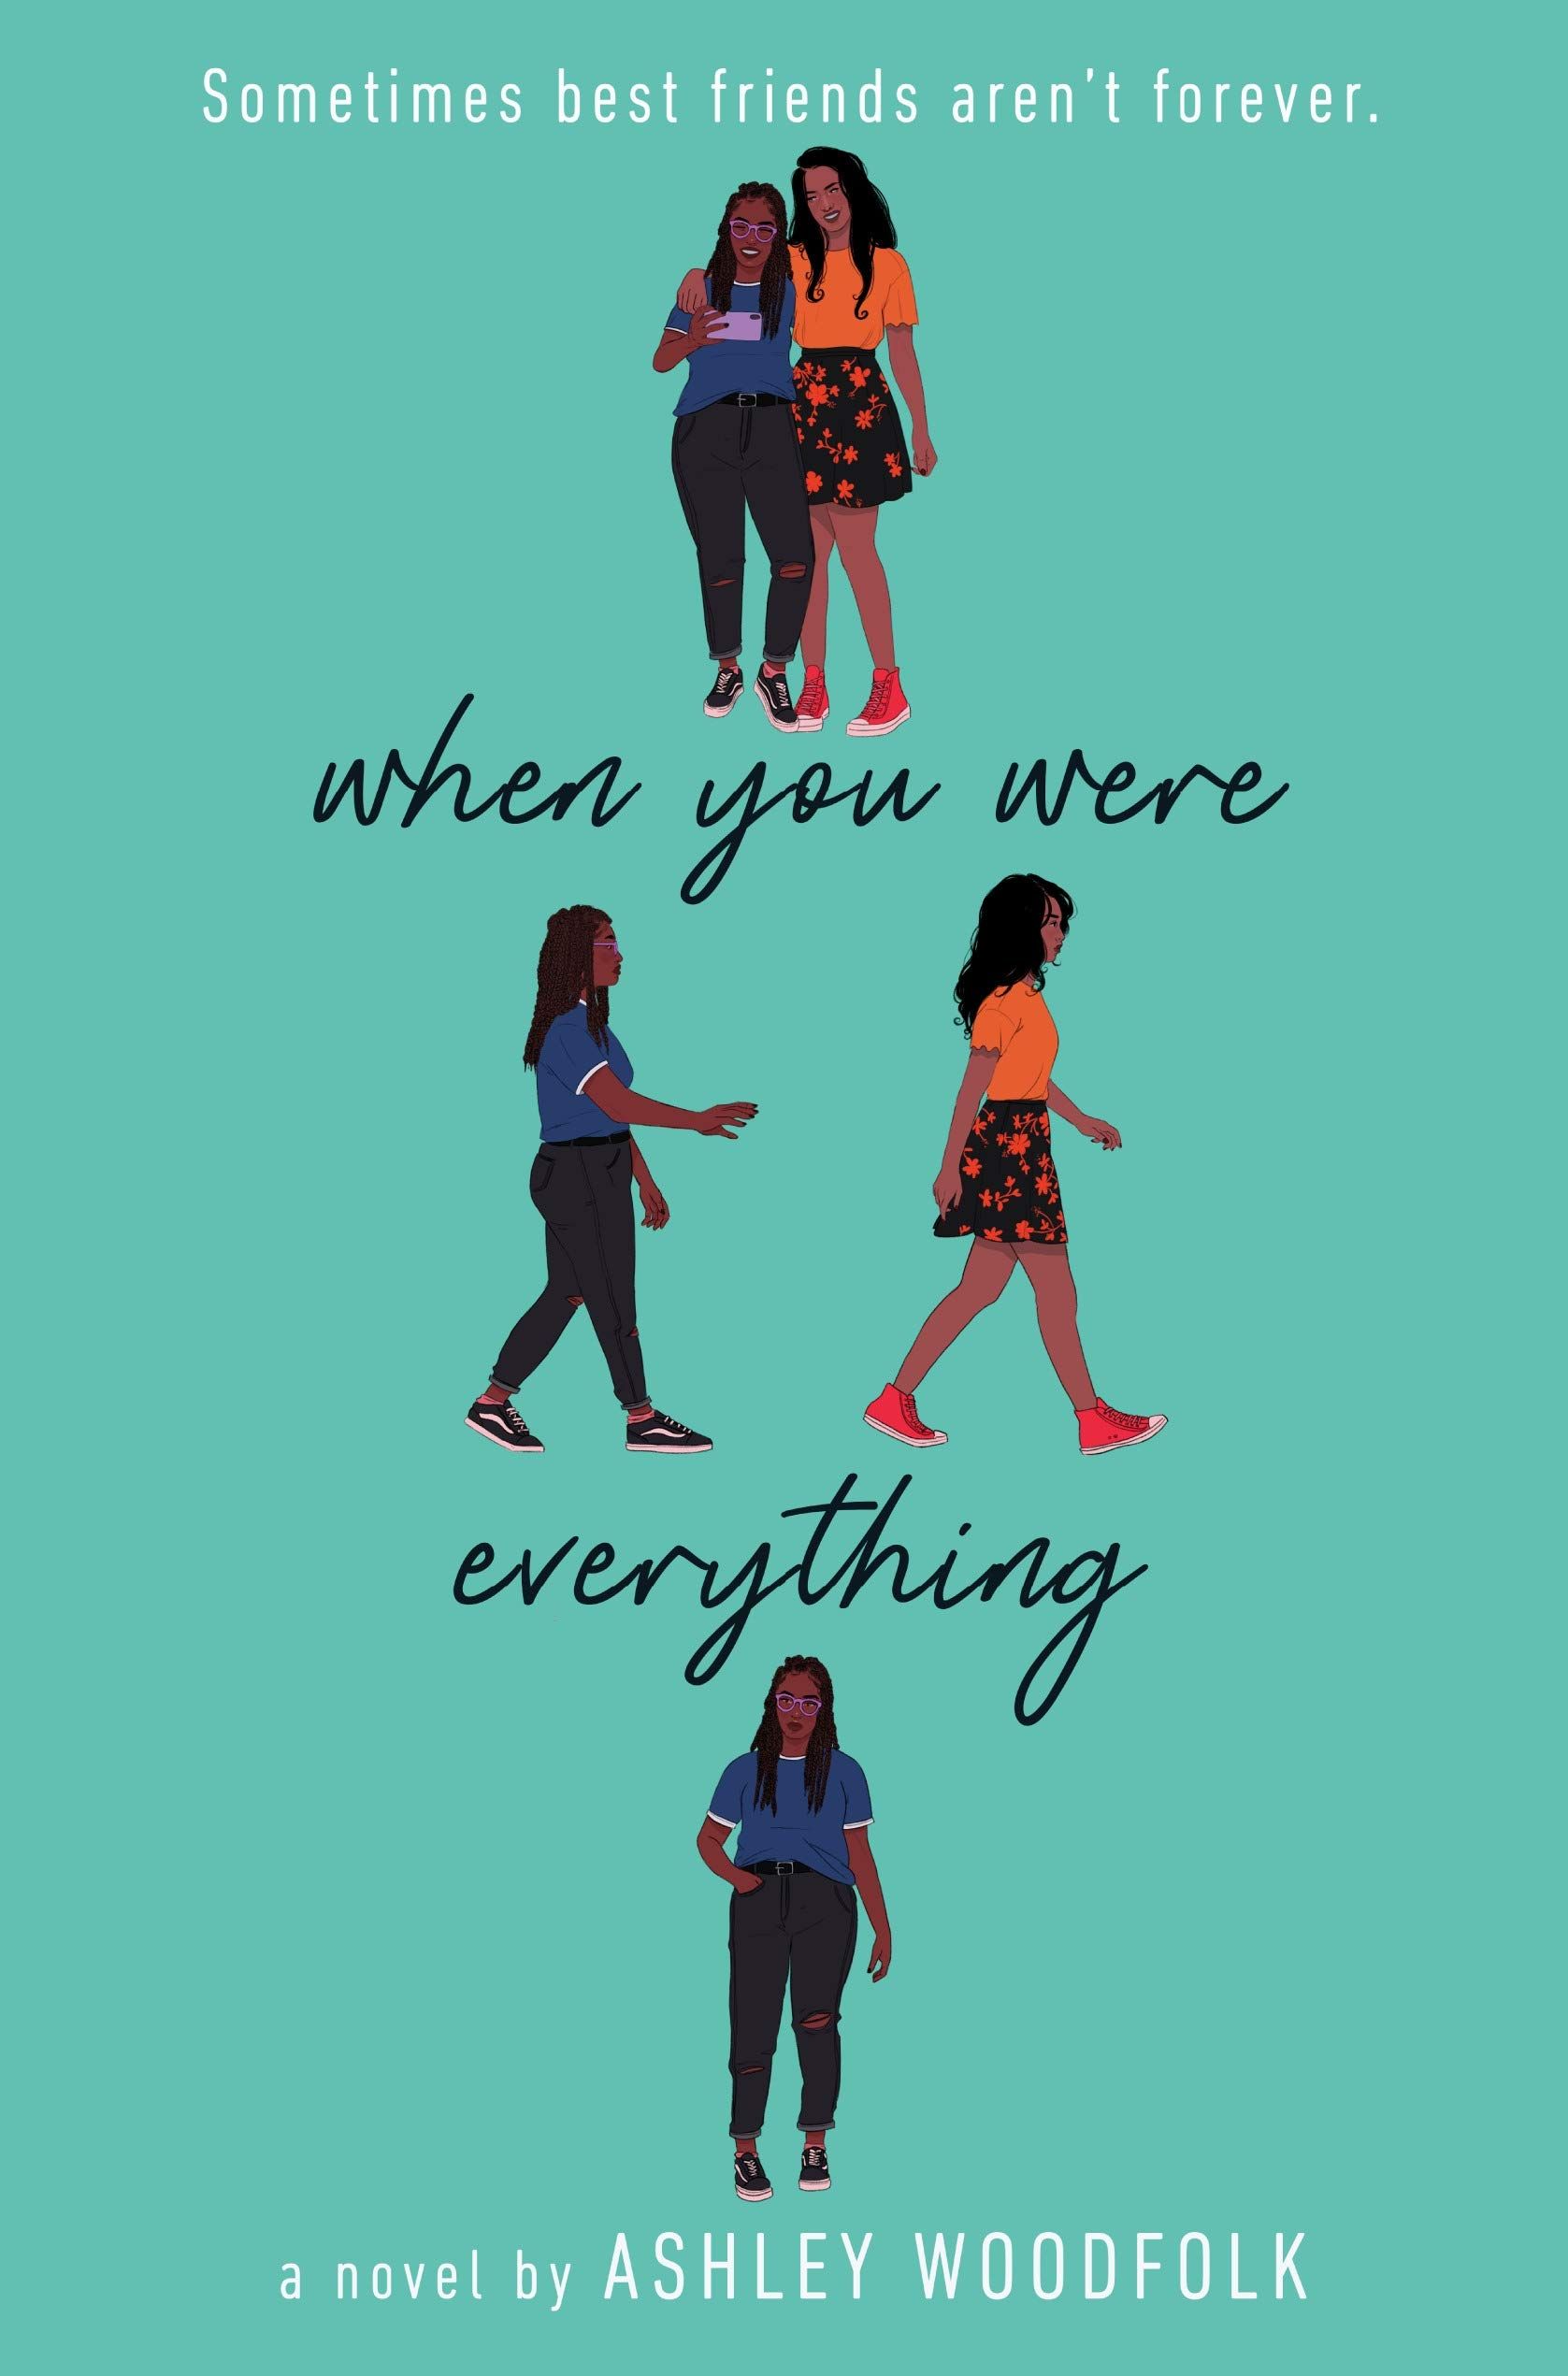 Cover image of "When You Were Everything" by Ashley Woodfolk.